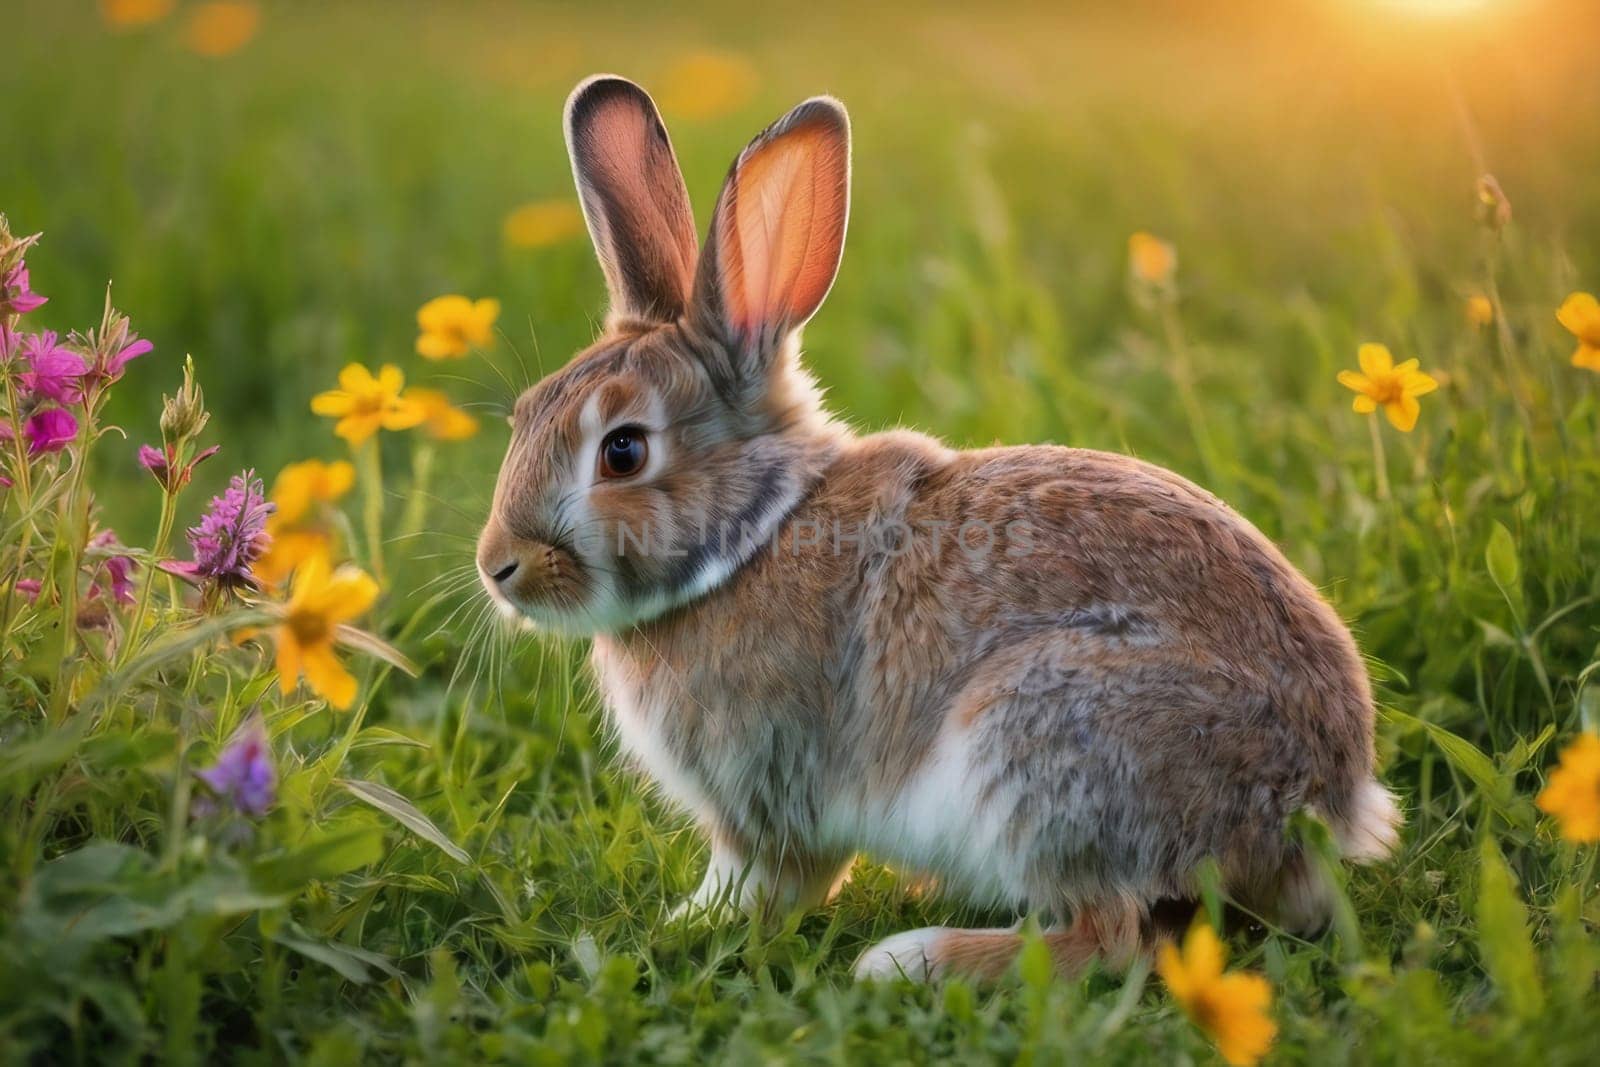 Rabbit on the lawn with flowers at sunset